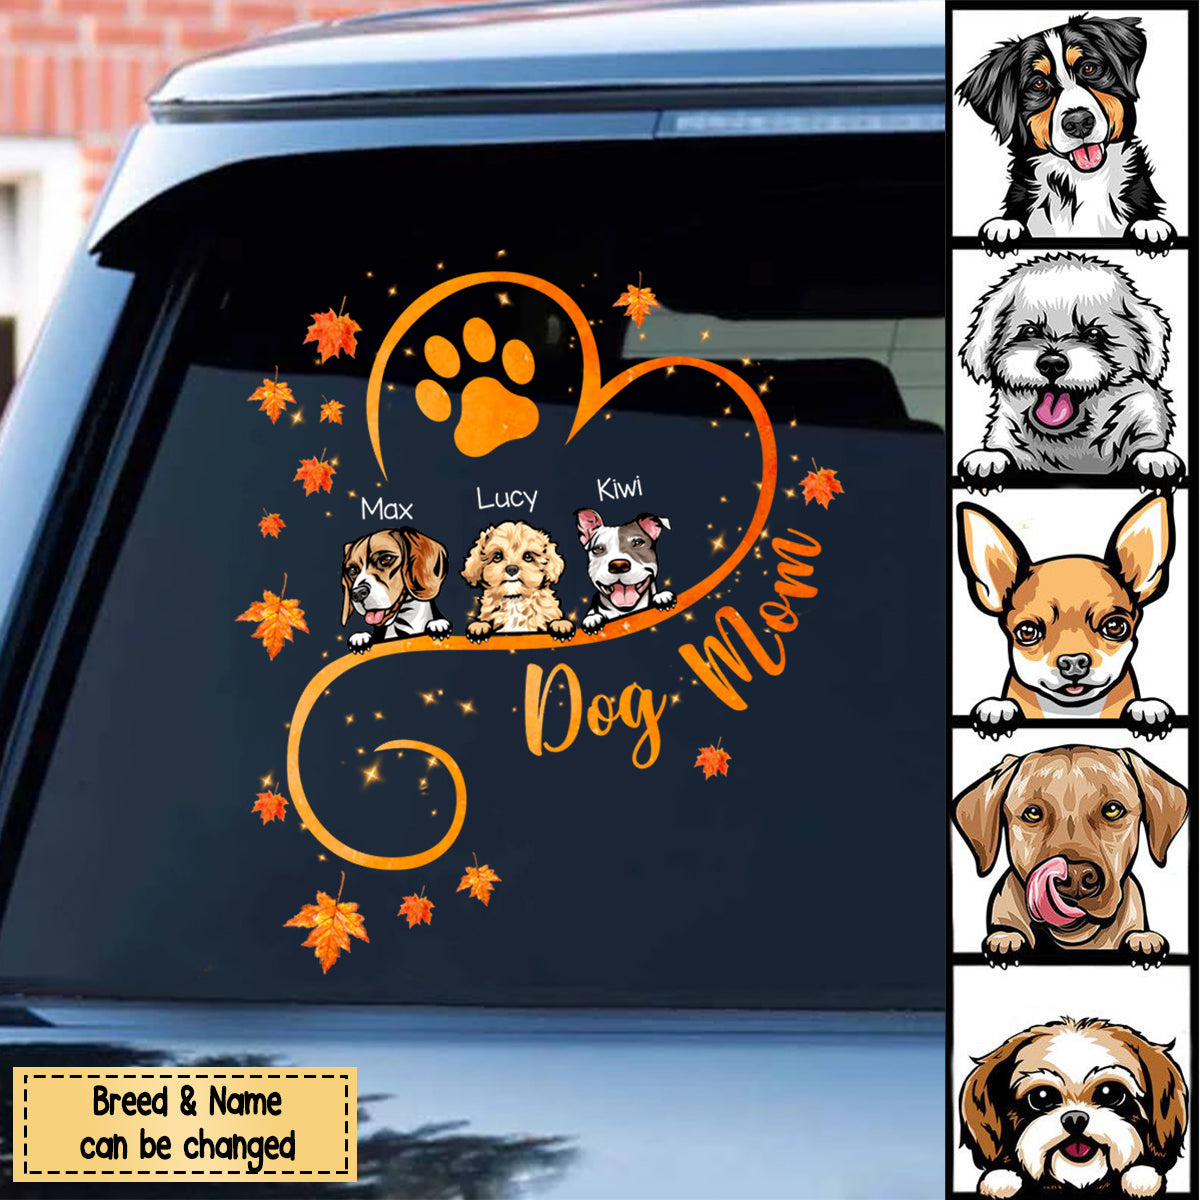 Cute Animal Sticker Pack qty 8 Cute Stickers for Animal Lovers